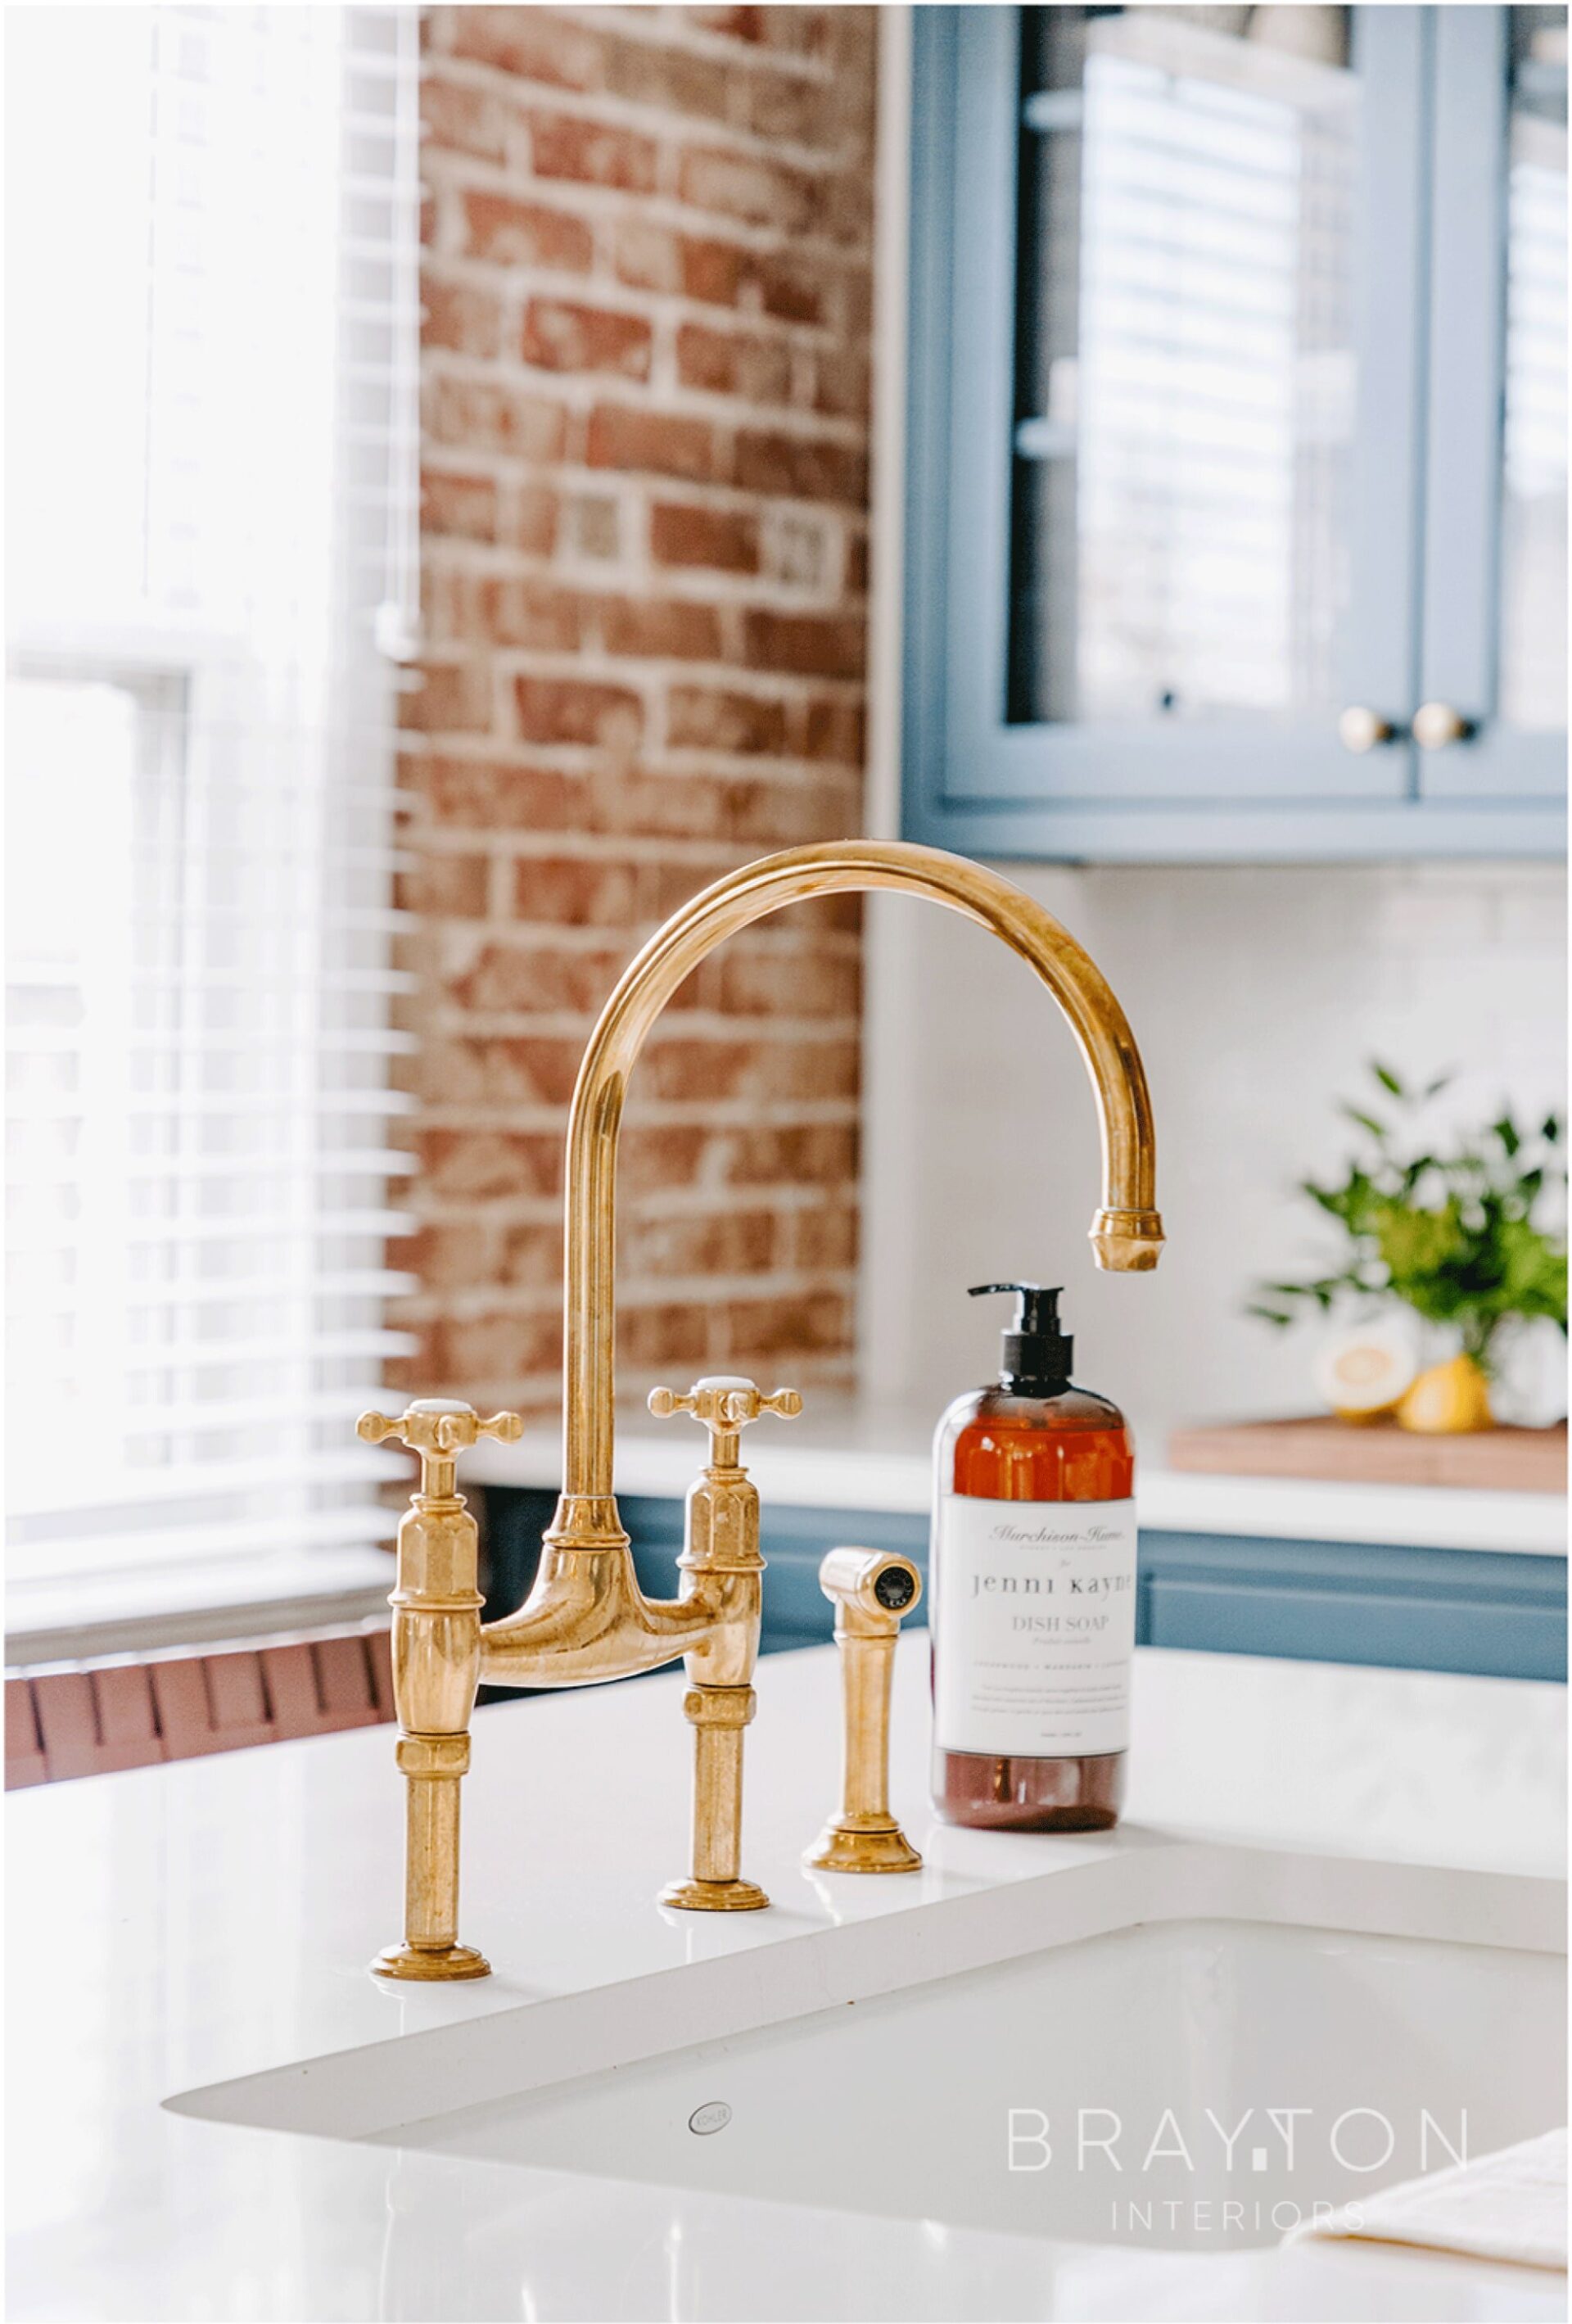 Unlacquered brass faucet from England and a ceramic sink by Kohler in historic Sloan’s Lake bungalow. Lakeside neighborhood in Denver, Colorado, featuring original exposed brick throughout main living area.